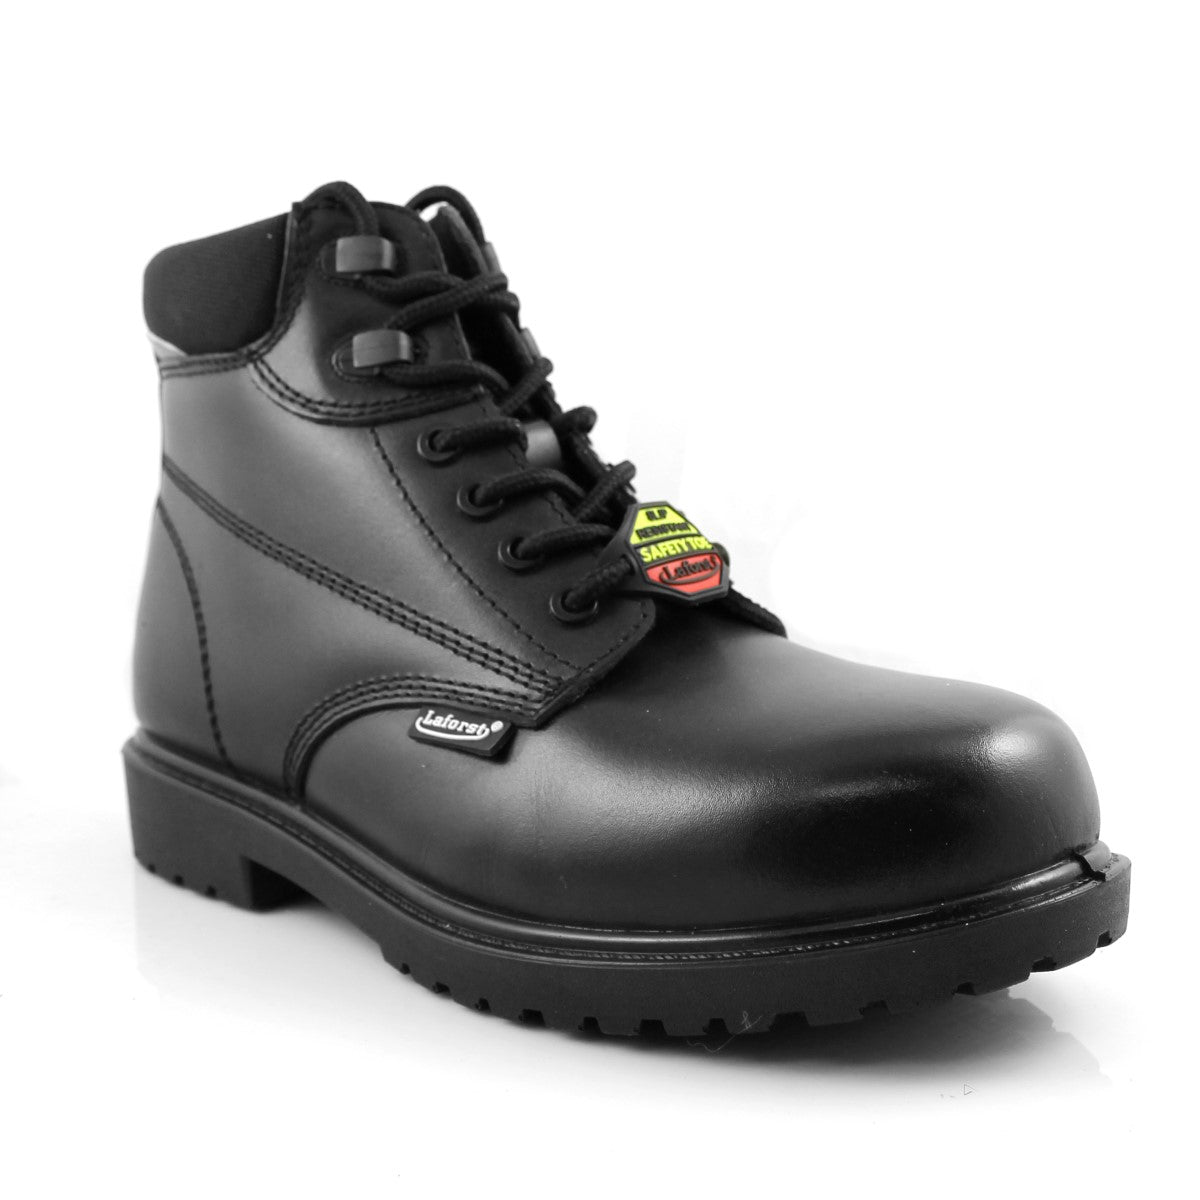 Gunther 9419-01 / Composite Safety Toe